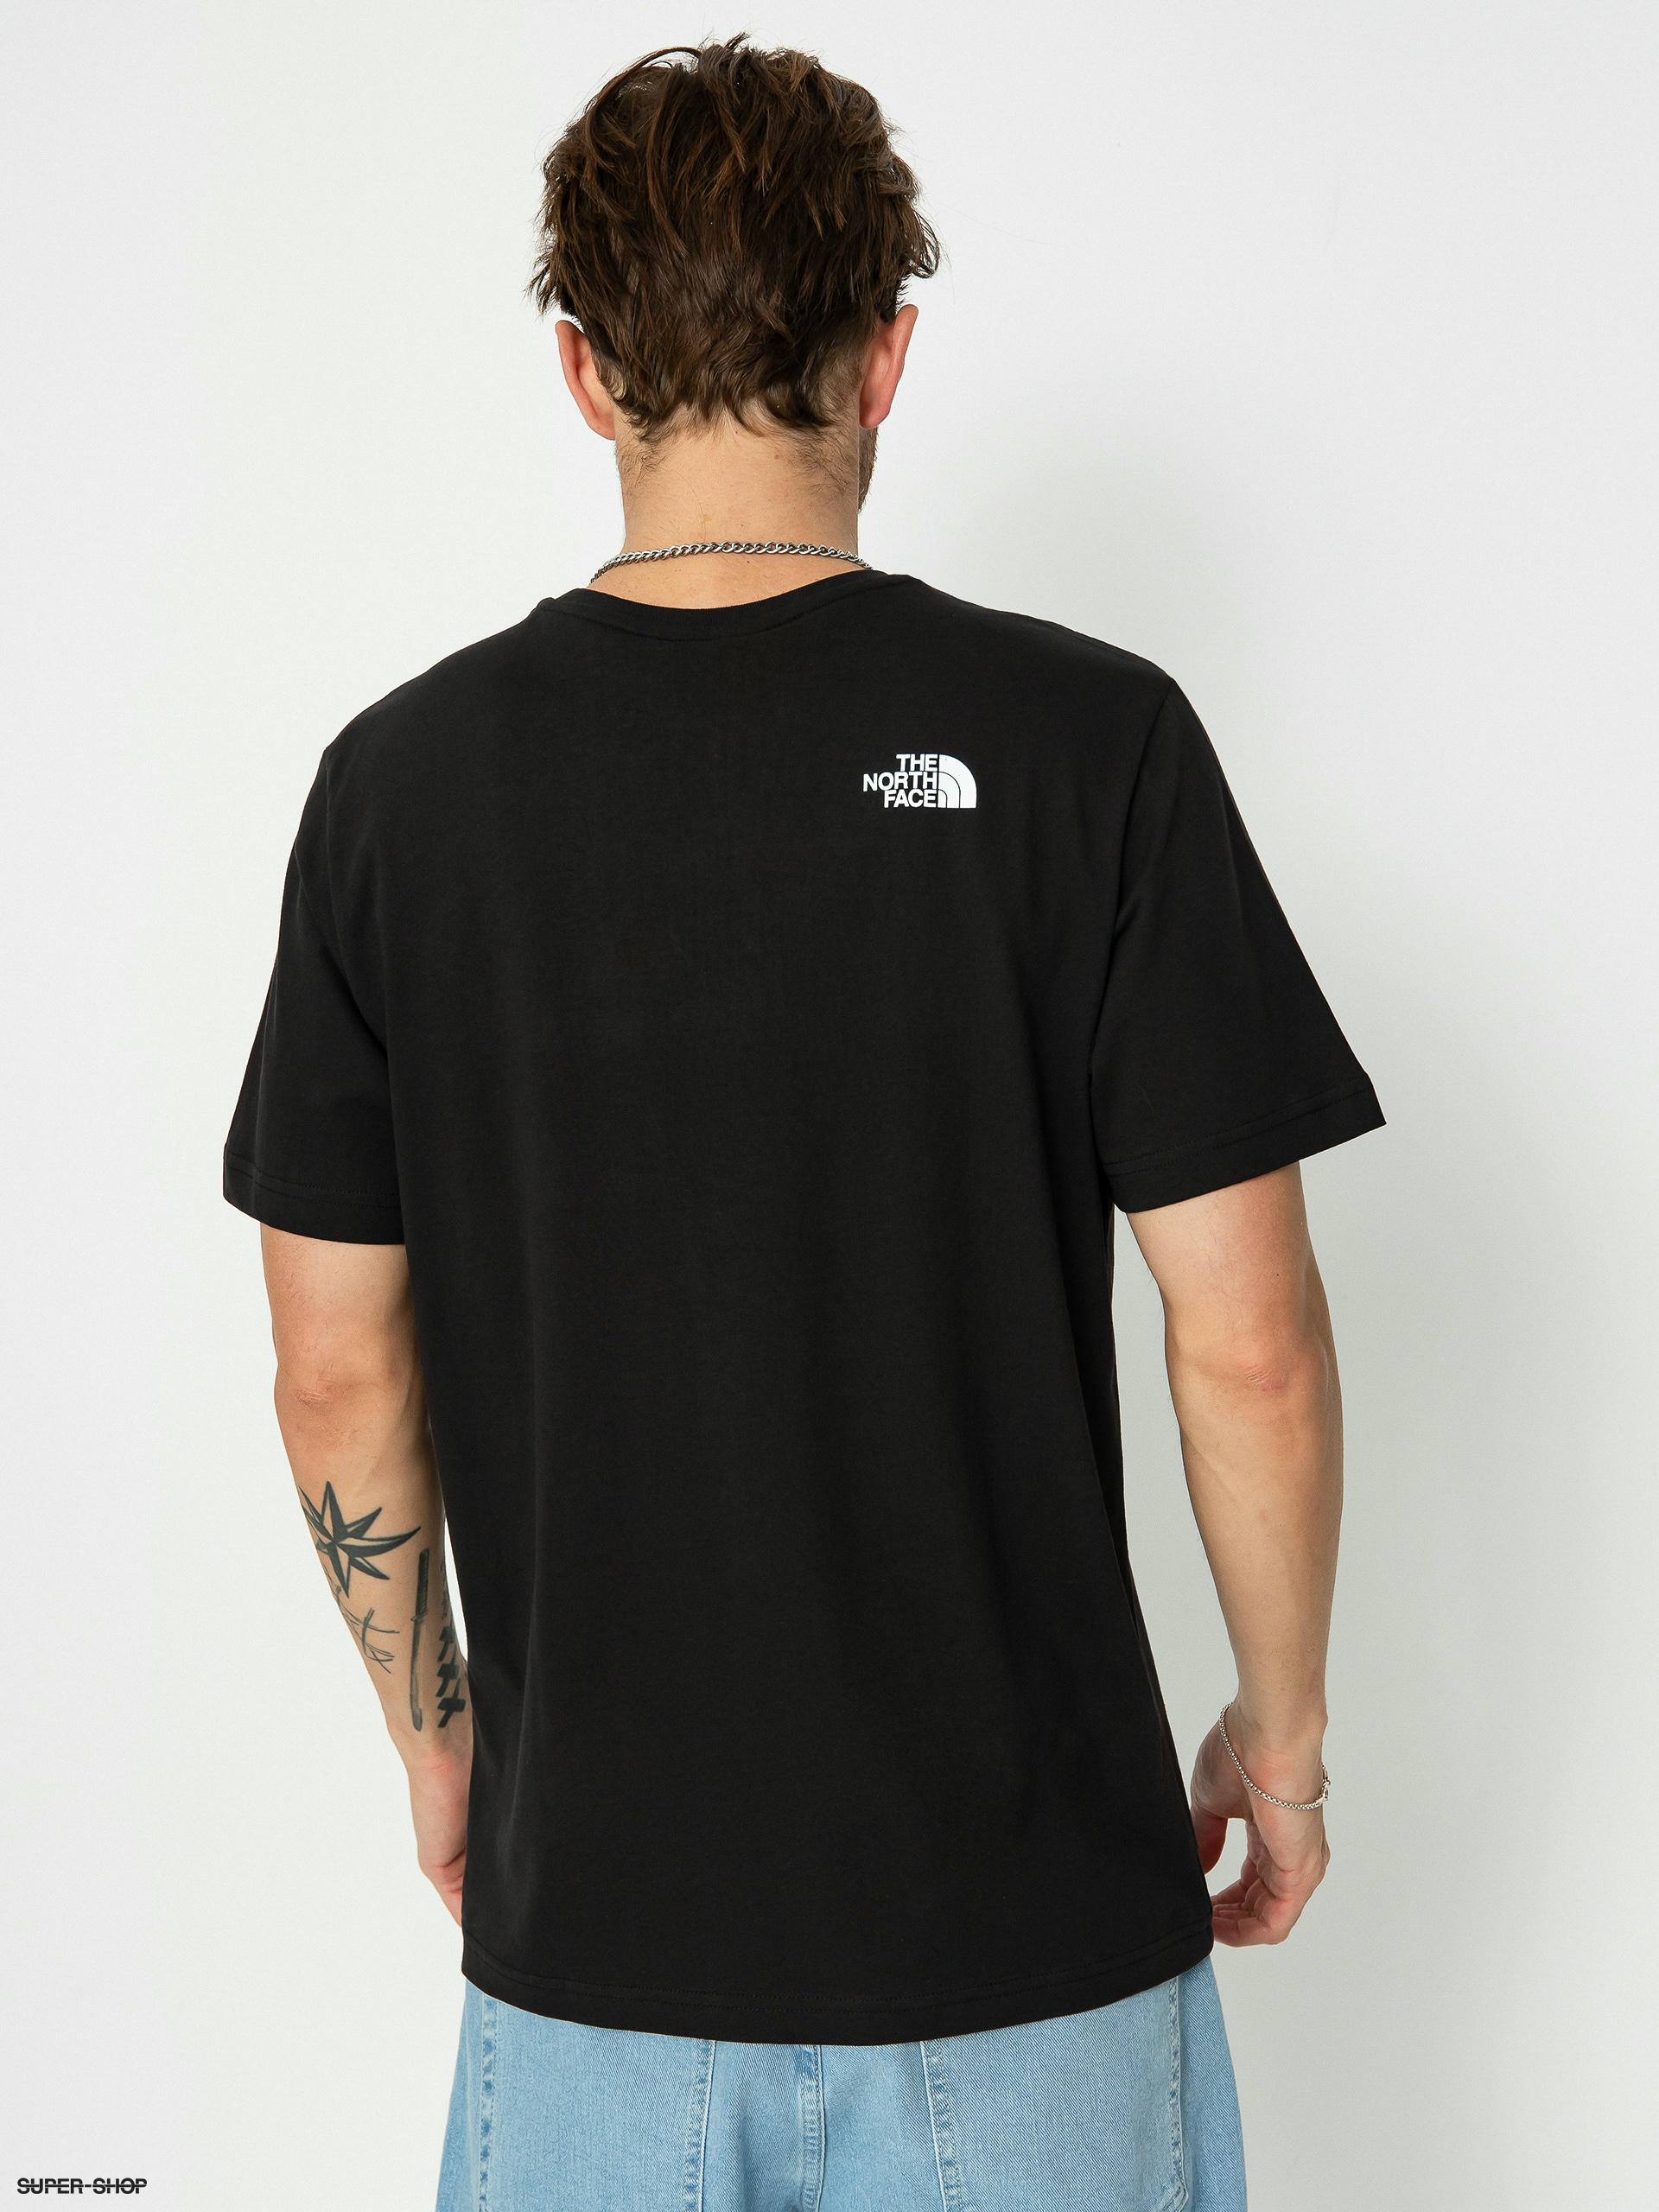 The North Face Woodcut Dome Men's T-Shirt - Kloppers Sport